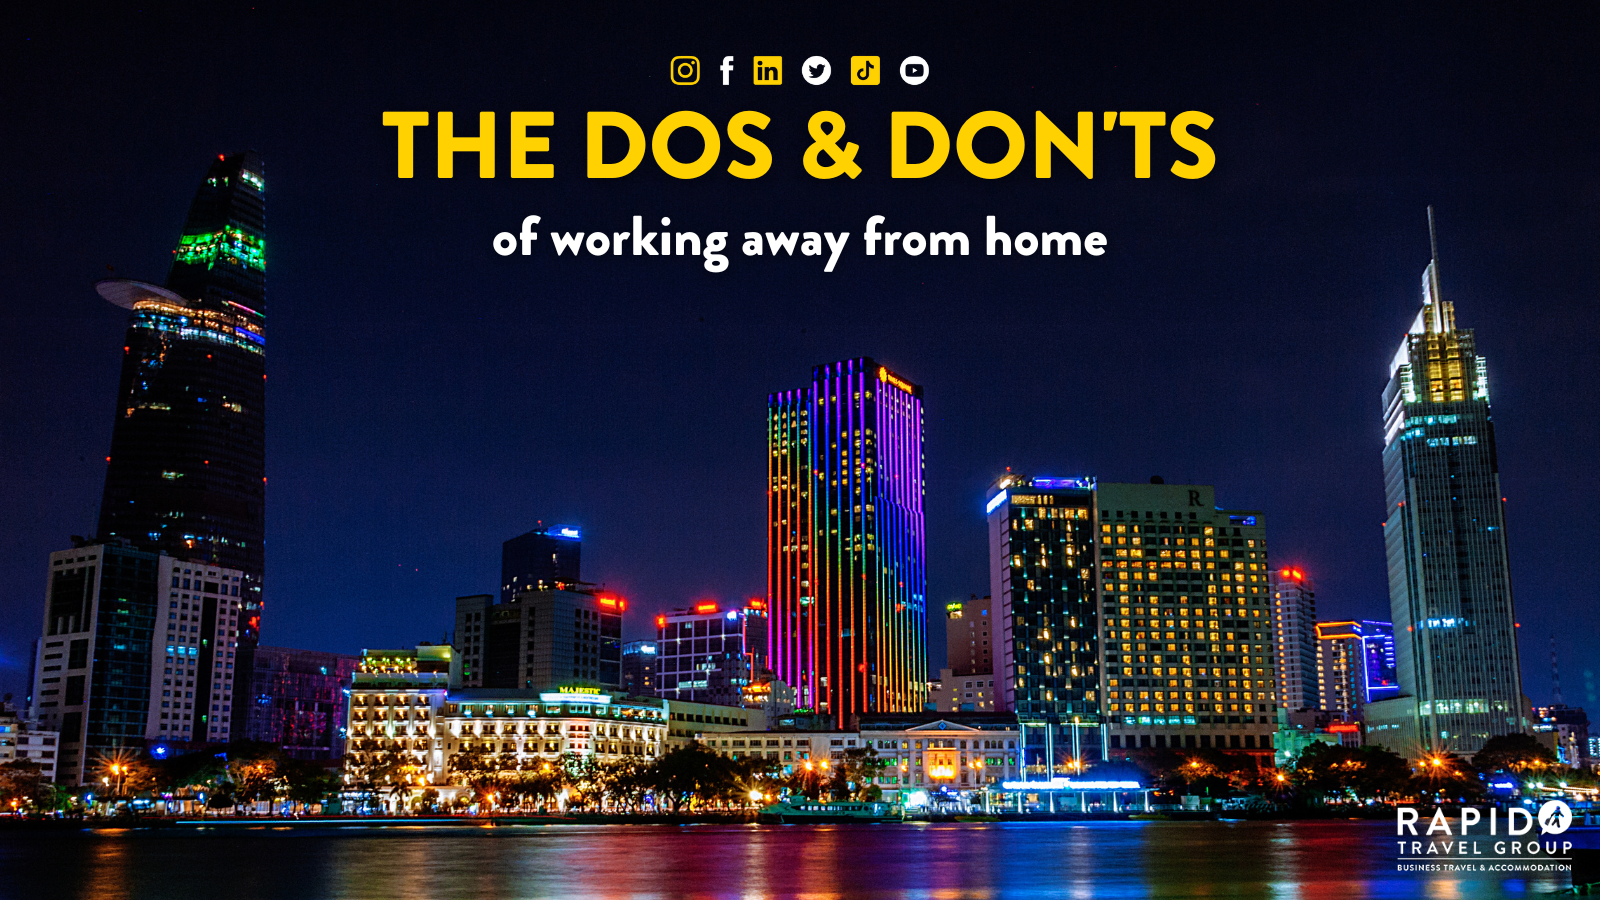 the dos & don'ts of working away from home